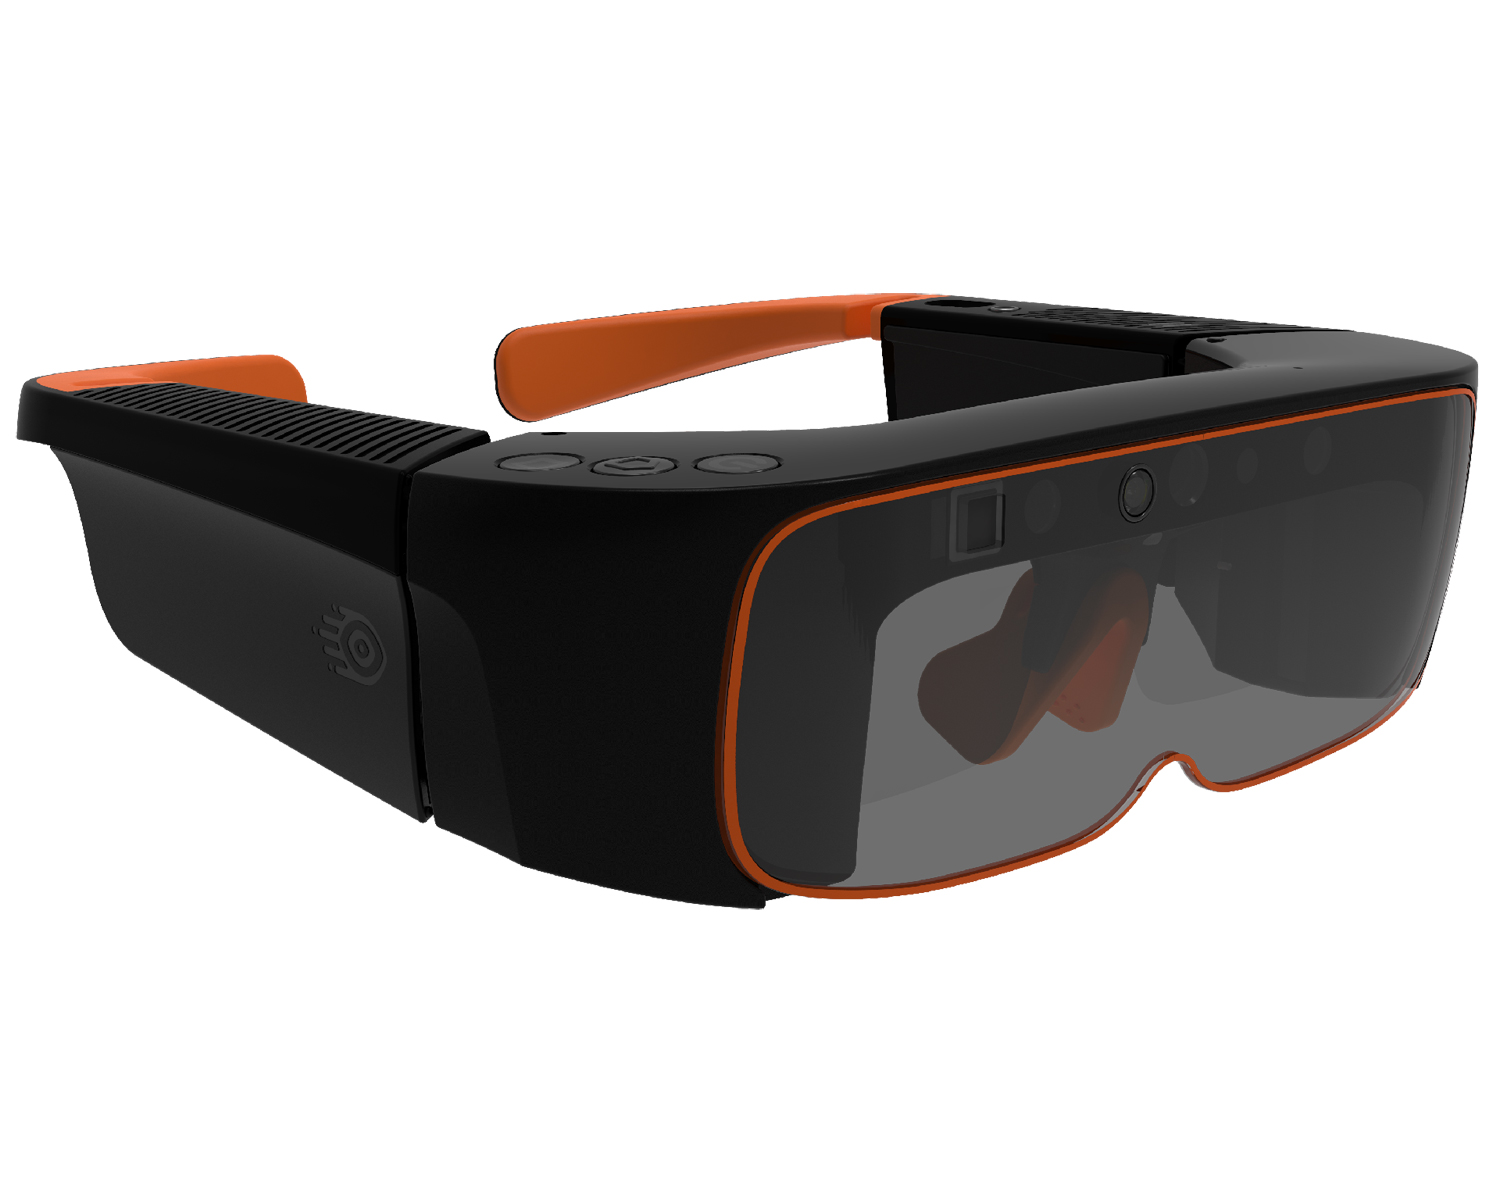 Mixed Augmented Reality Smart Glasses with Gesture Controlled Hands-Free  and Voice Activated Platform – Oz Robotics